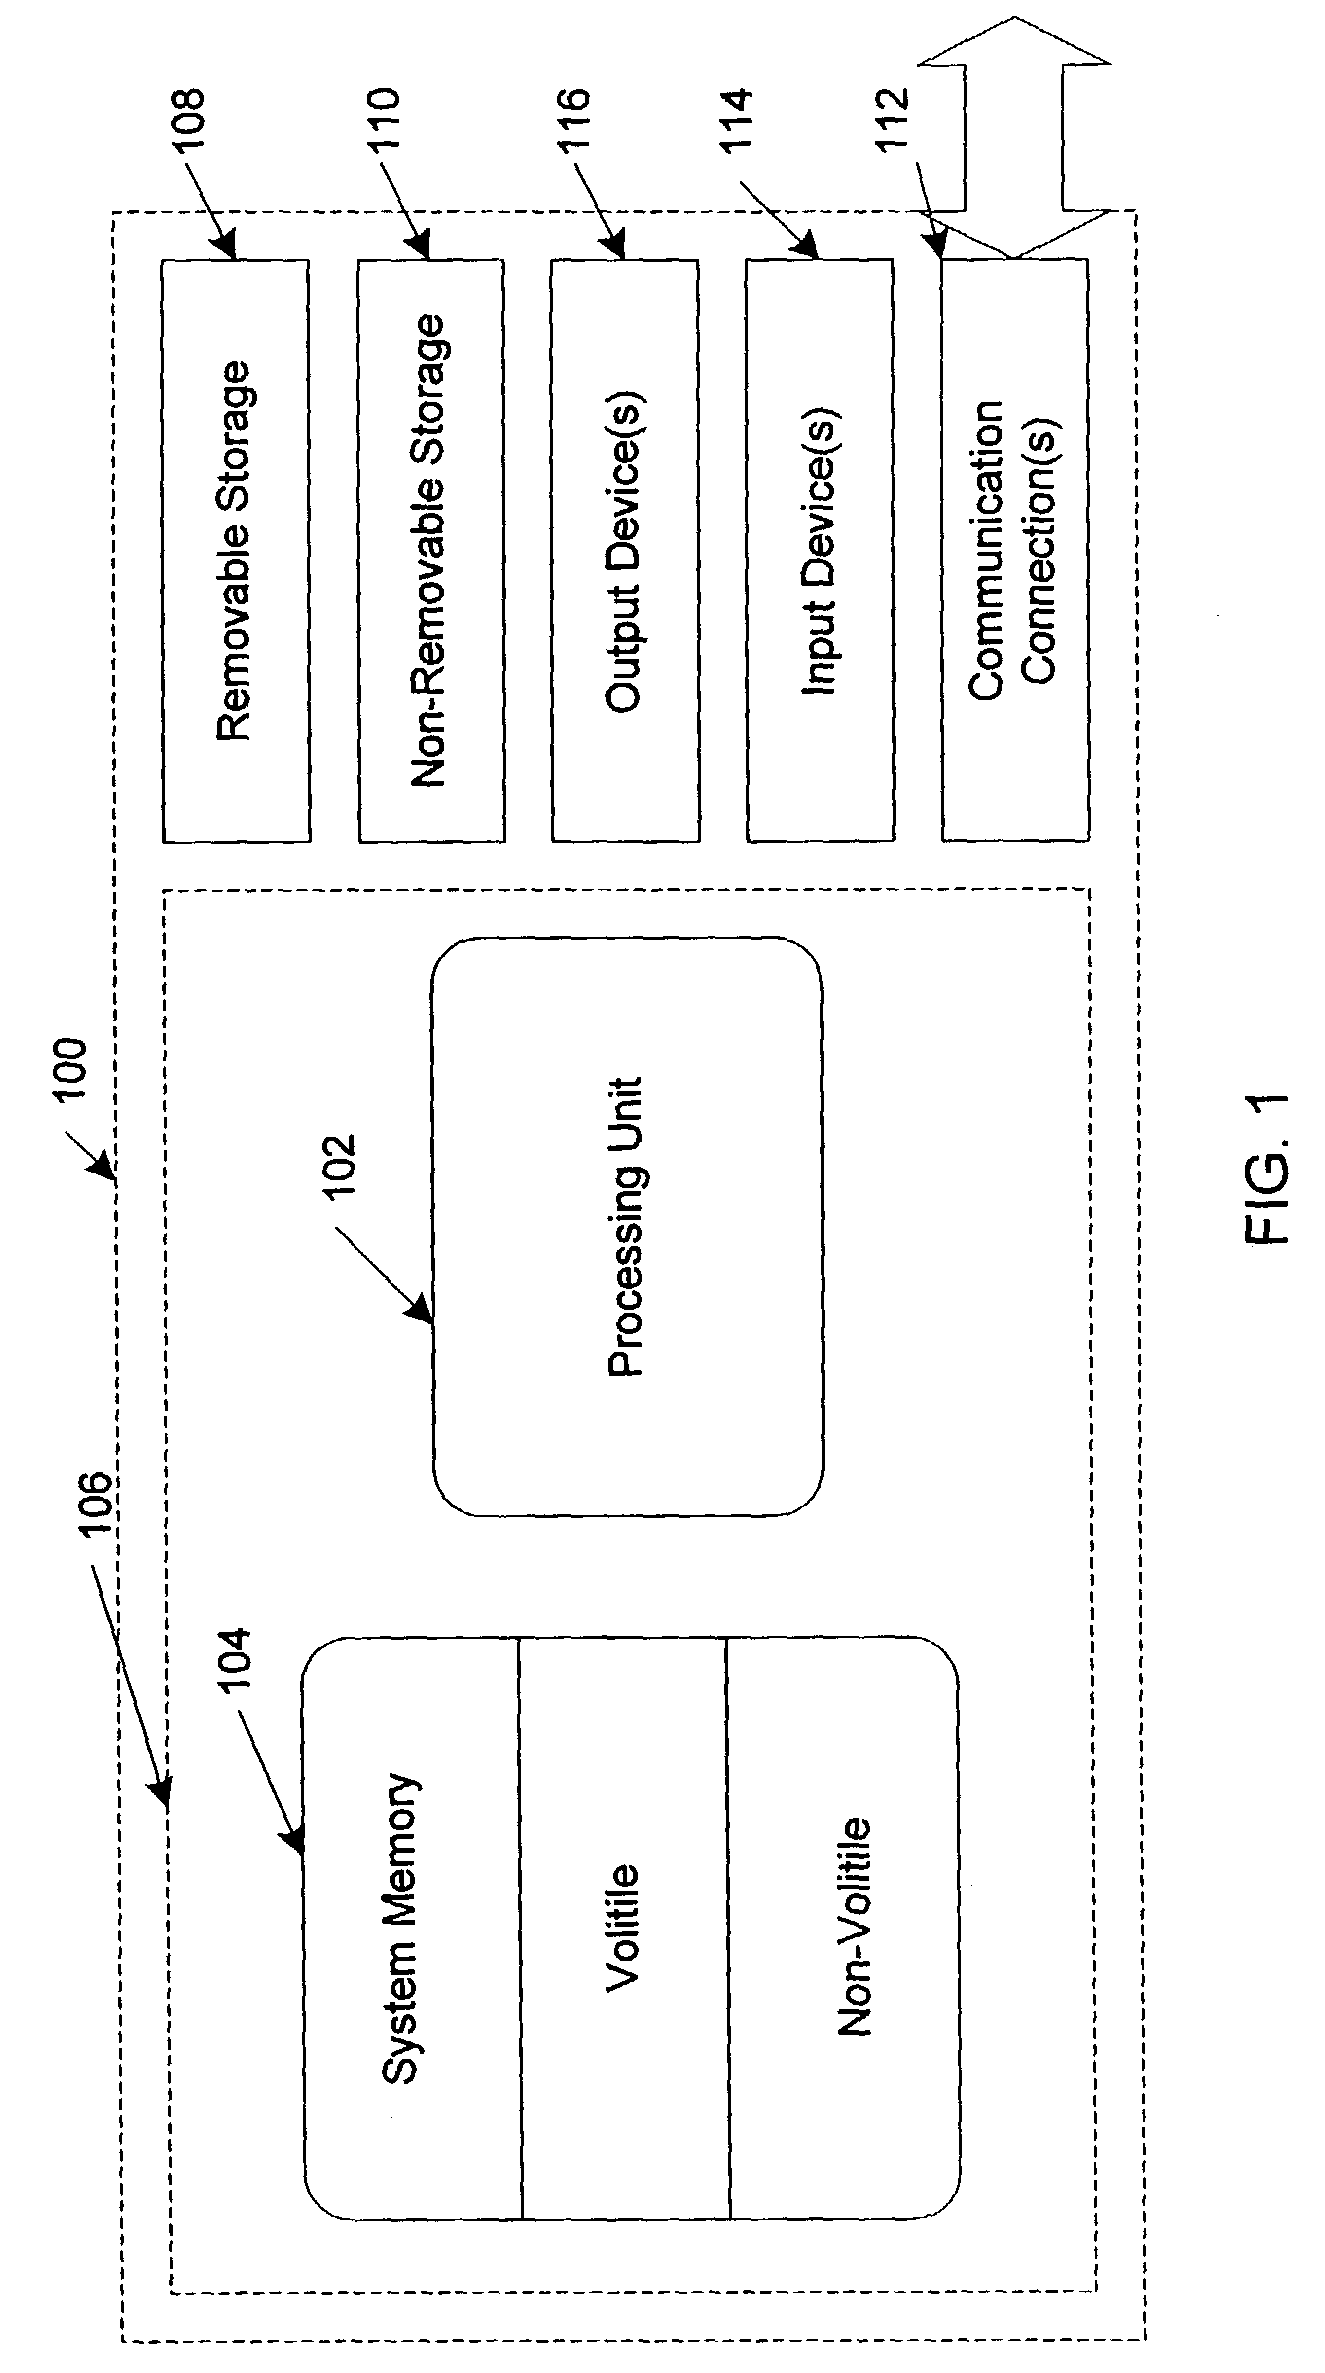 Synchronizing centralized data store from distributed independent data stores using fixed application programming interfaces